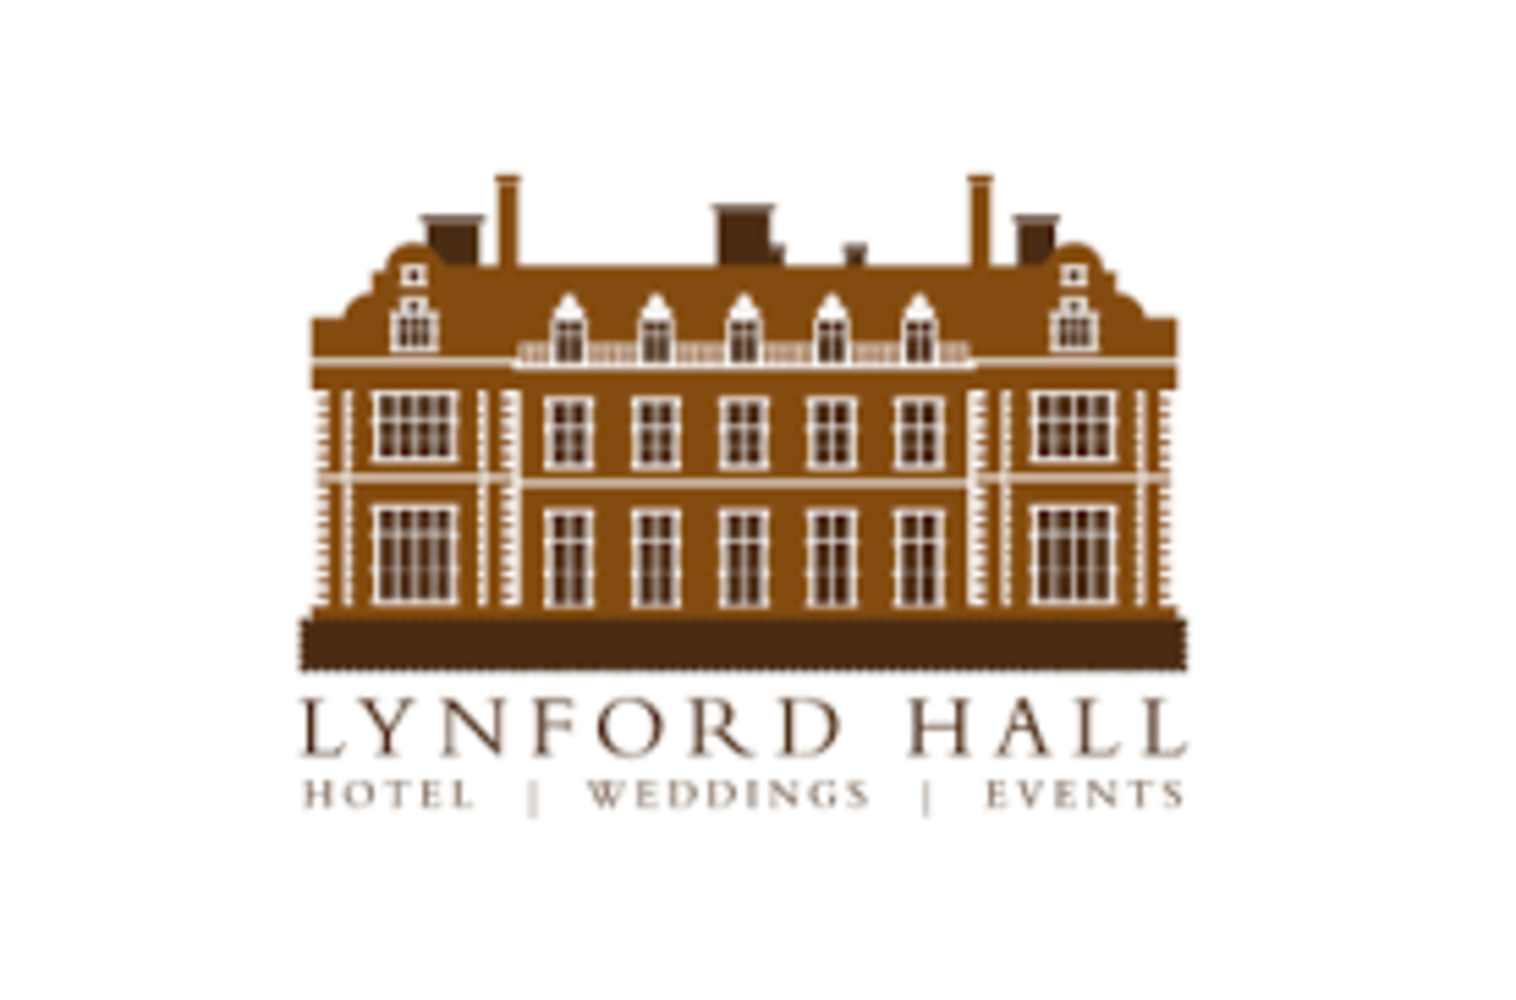 Entire Contents of Lynford Hall Hotel - To include Catering Equipment, Bar, Restaurant, Bedroom and Event furniture and equipment and much more!